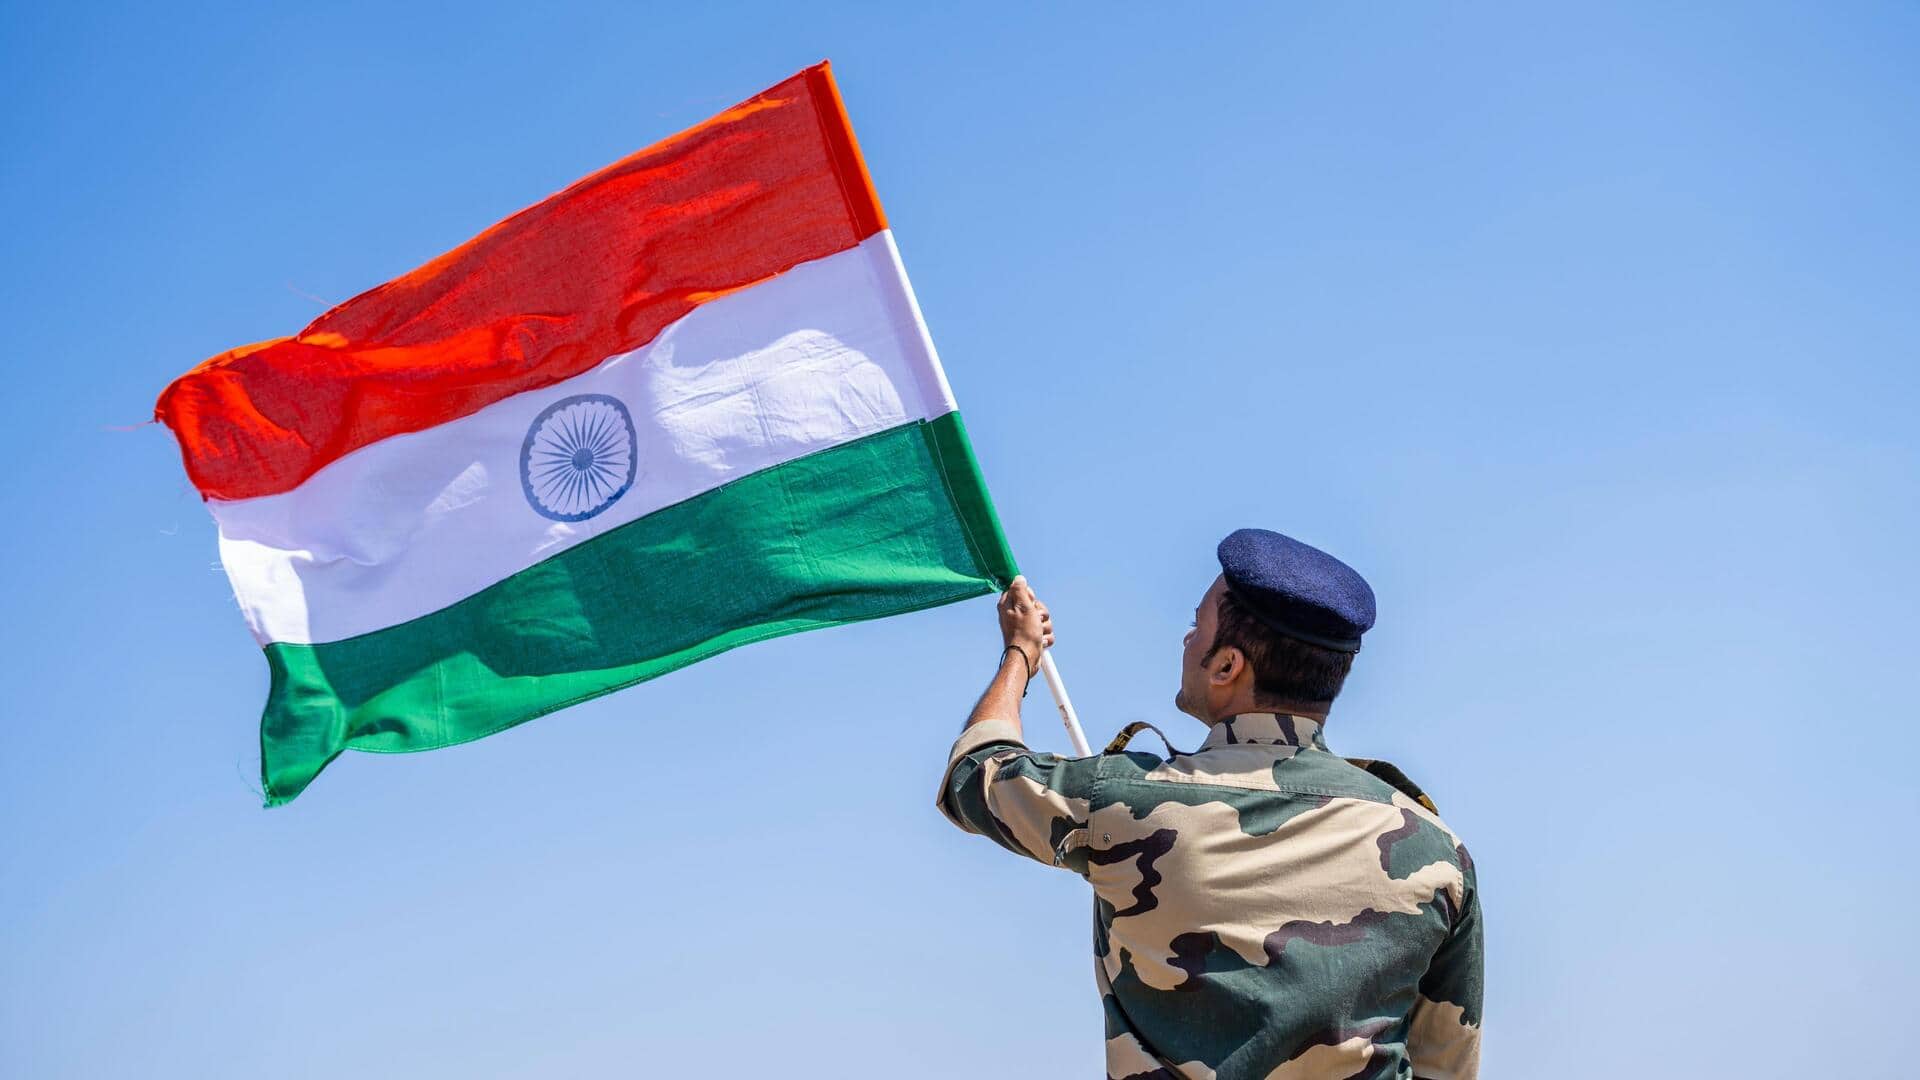 Want to donate to Indian Army? Here are 5 ways